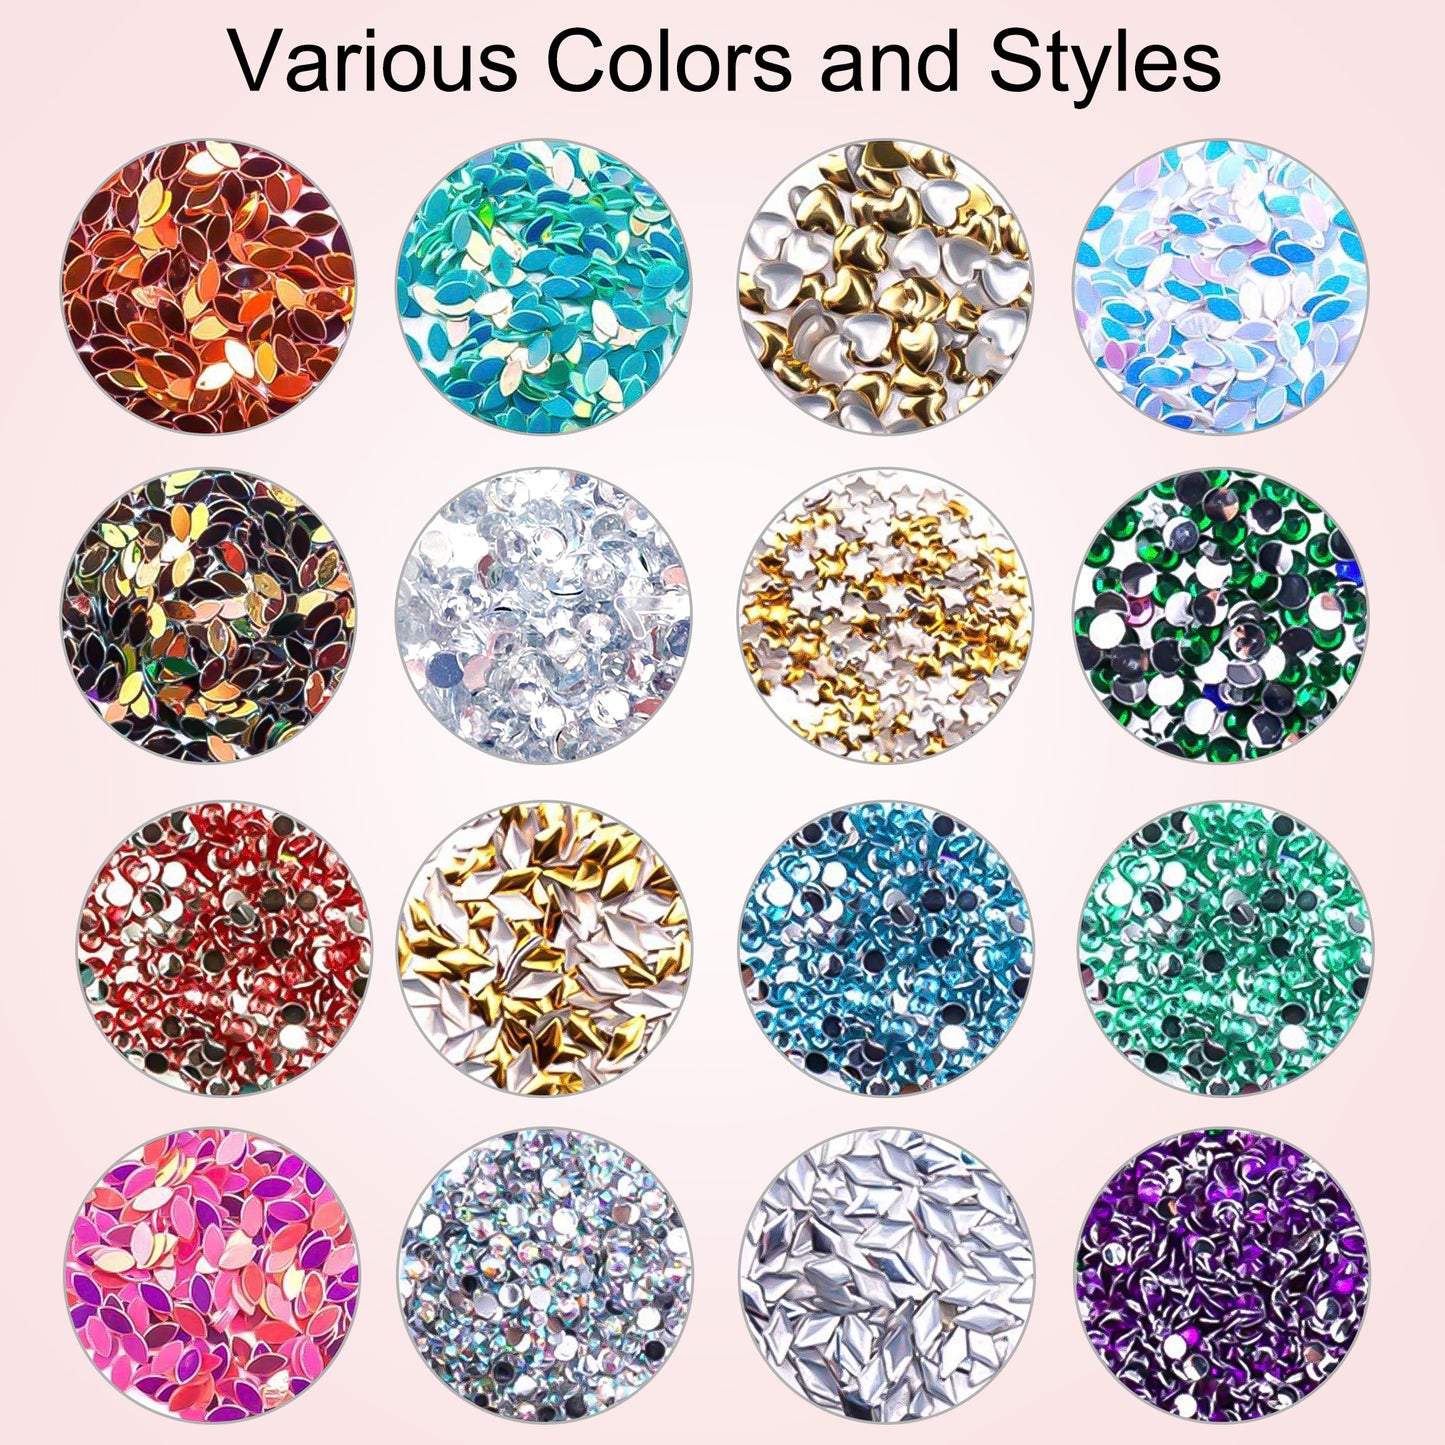 5 Boxes Nail Art Rhinestones and Sequins - Nail Crystal Gems Nail Diamonds,Gold Silver Nail Art Studs Colorful Nail kit,with Tweezers and Wax Pen for Nail Art Supplies Accessories